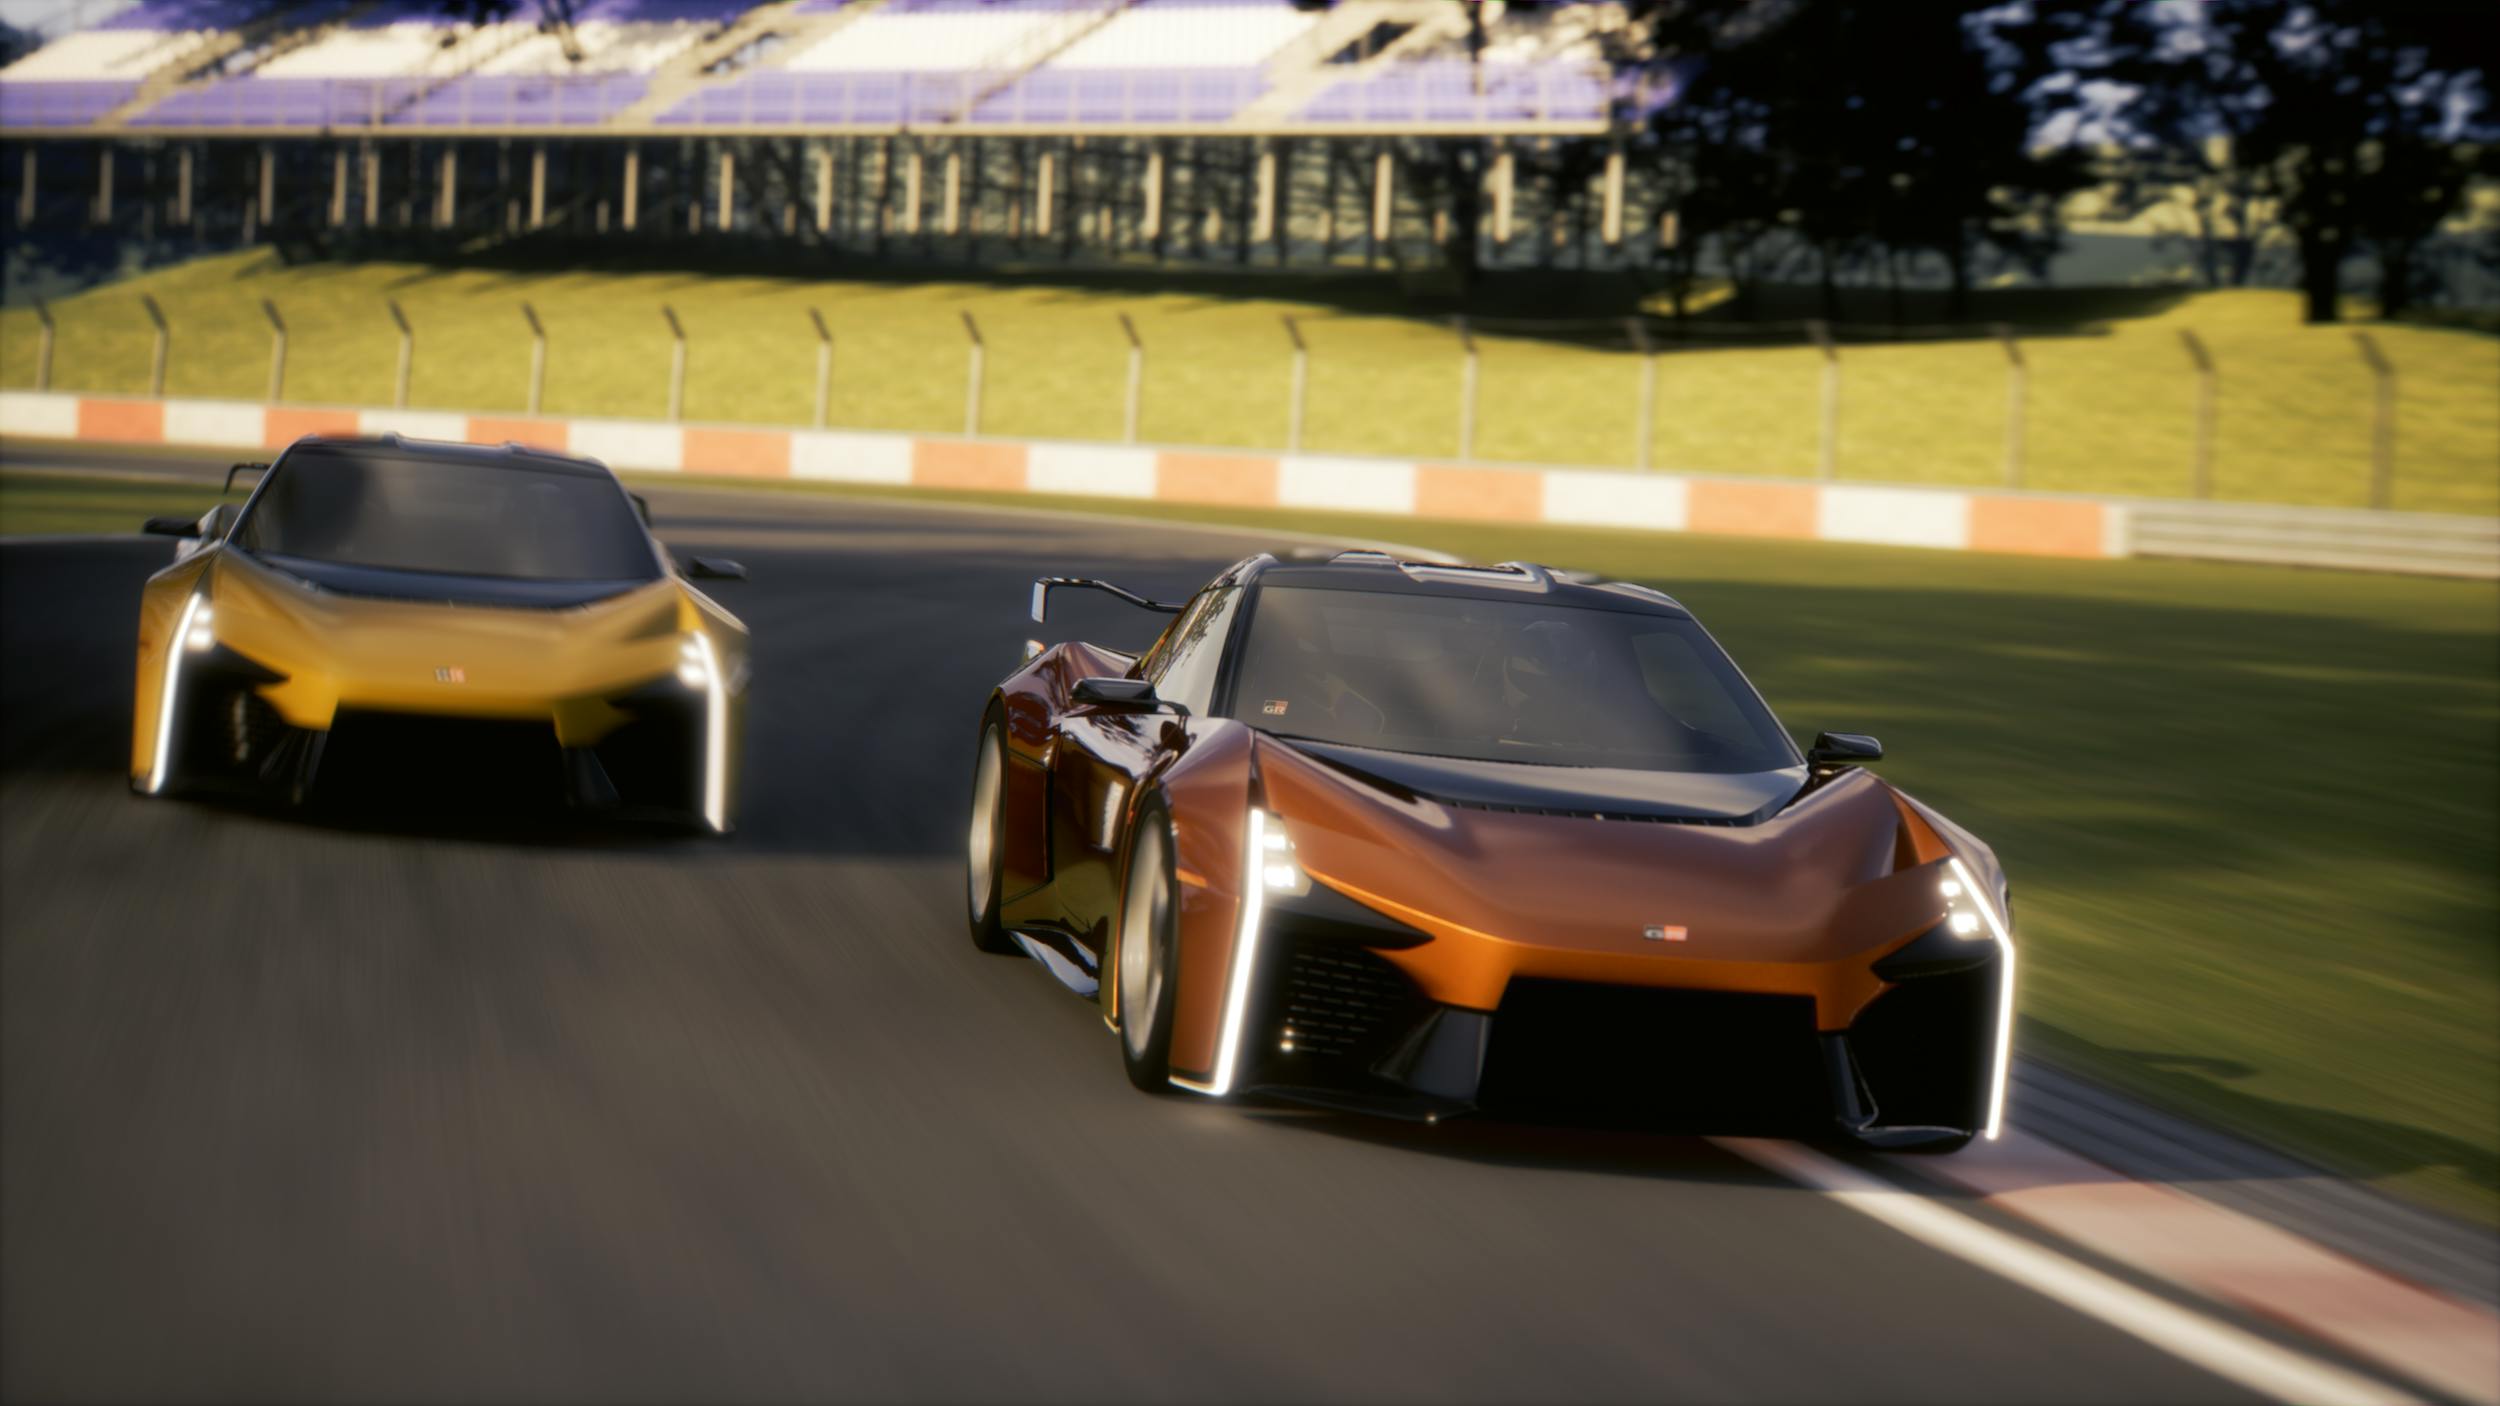 Toyota FT-Se sports car concept exterior orange and yellow cars on track front end rendering